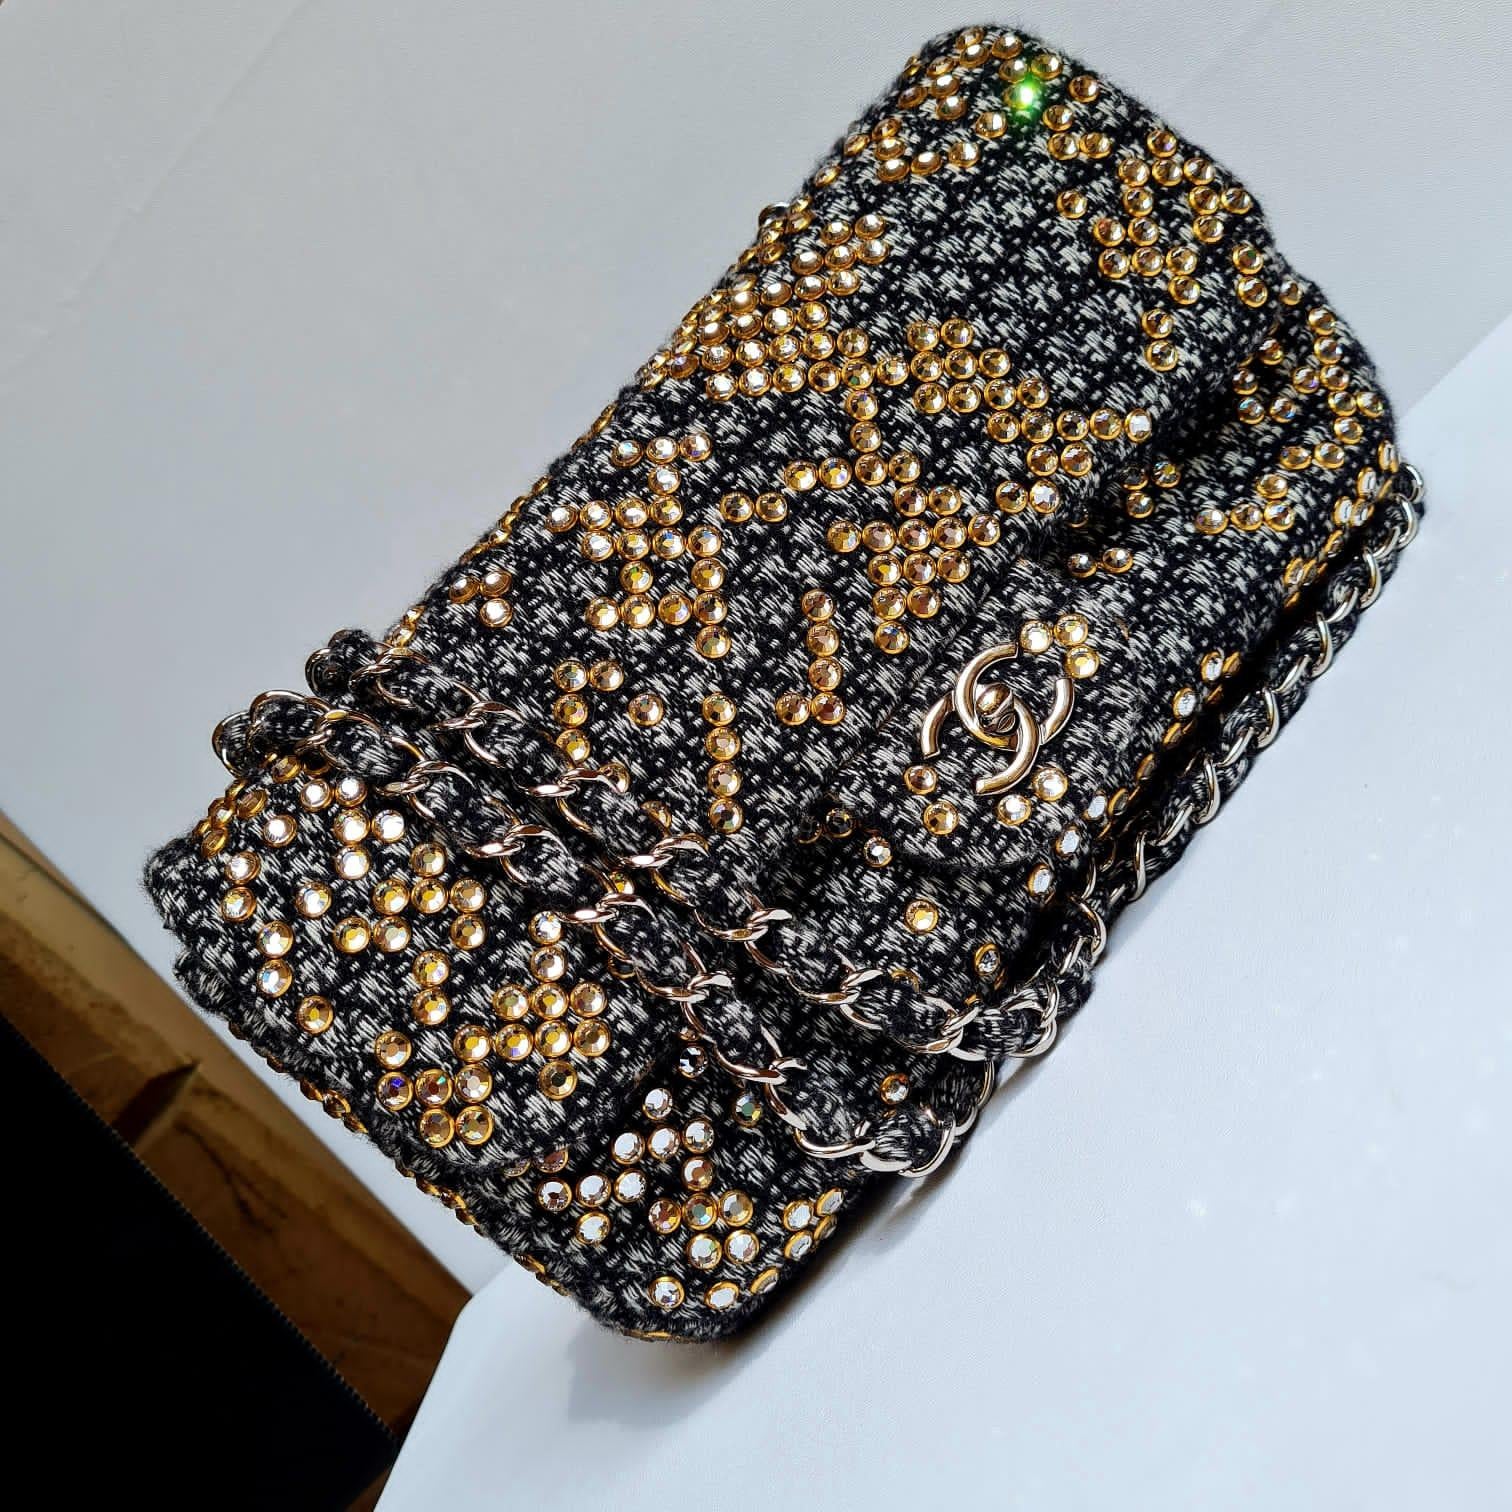 Single Flap Bag Woven tweed classic flap bag with swarovksi embellishments. Overall still in excellent condition. The Swarovski embellishments glistens perfectly under the lights. 

Serial Number: #14016153
Inclusion: Authenticity Card, Dust Bag,